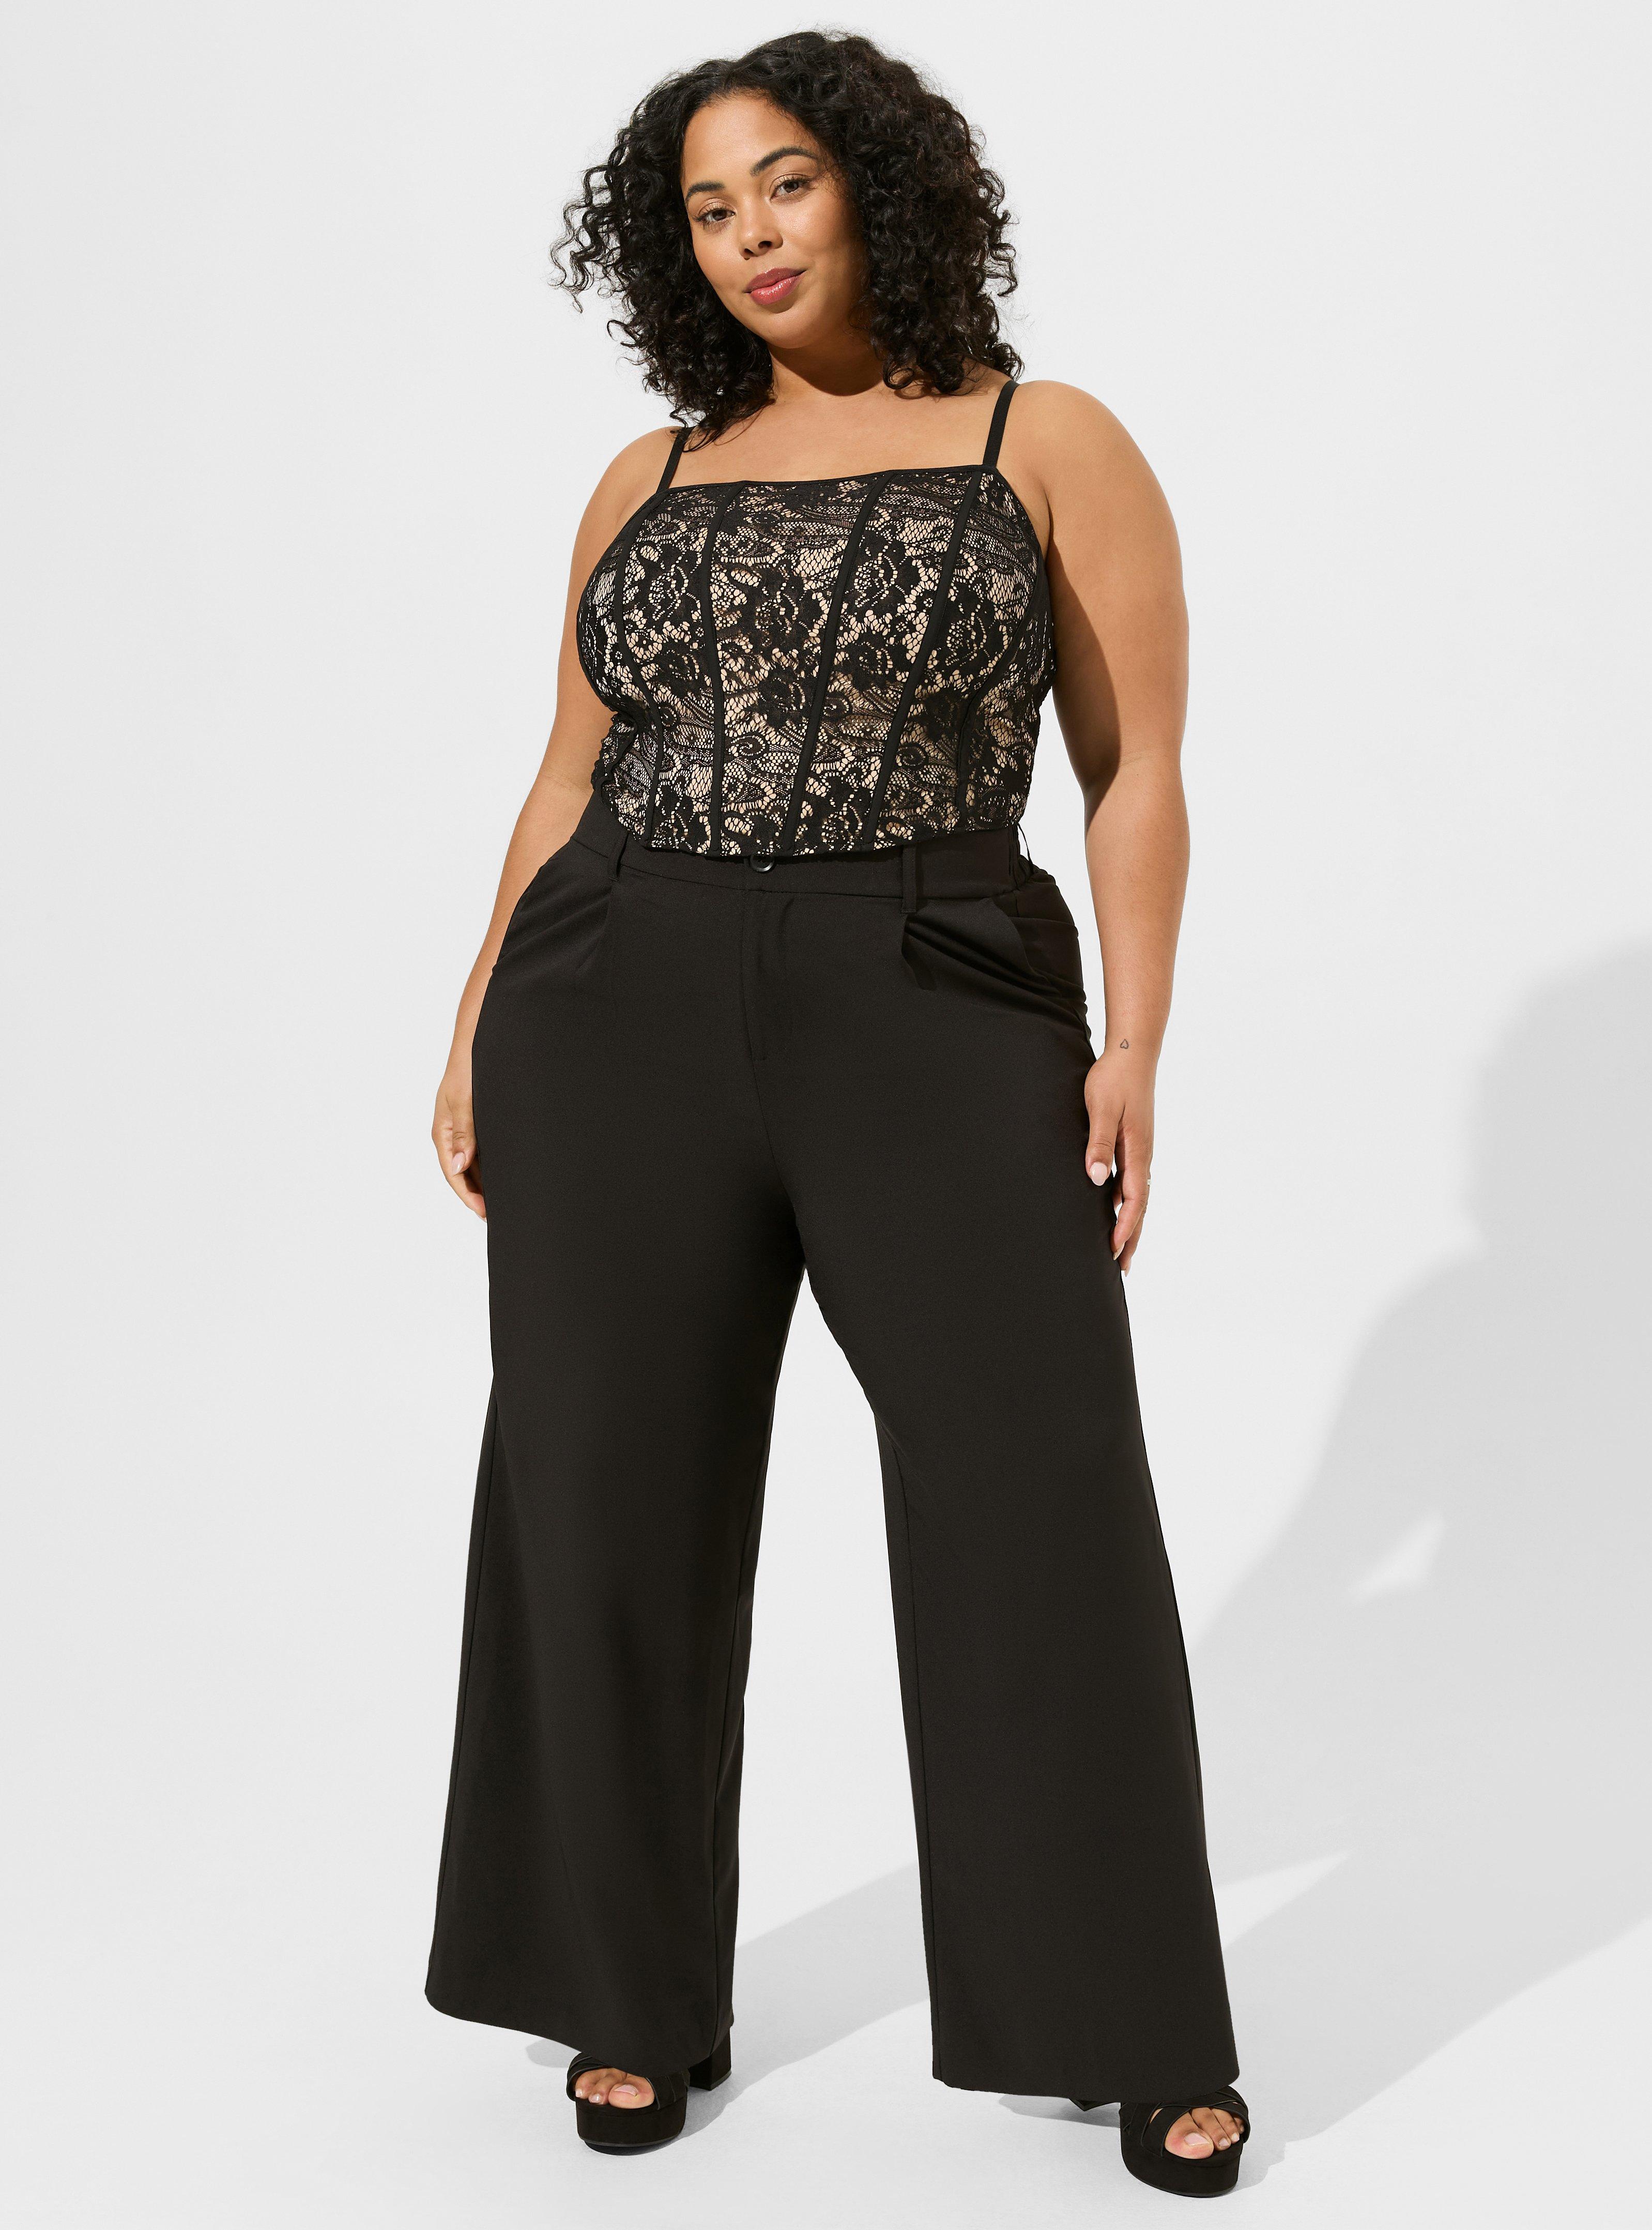 Plus Size - Satin Corset With Hook Front - Torrid